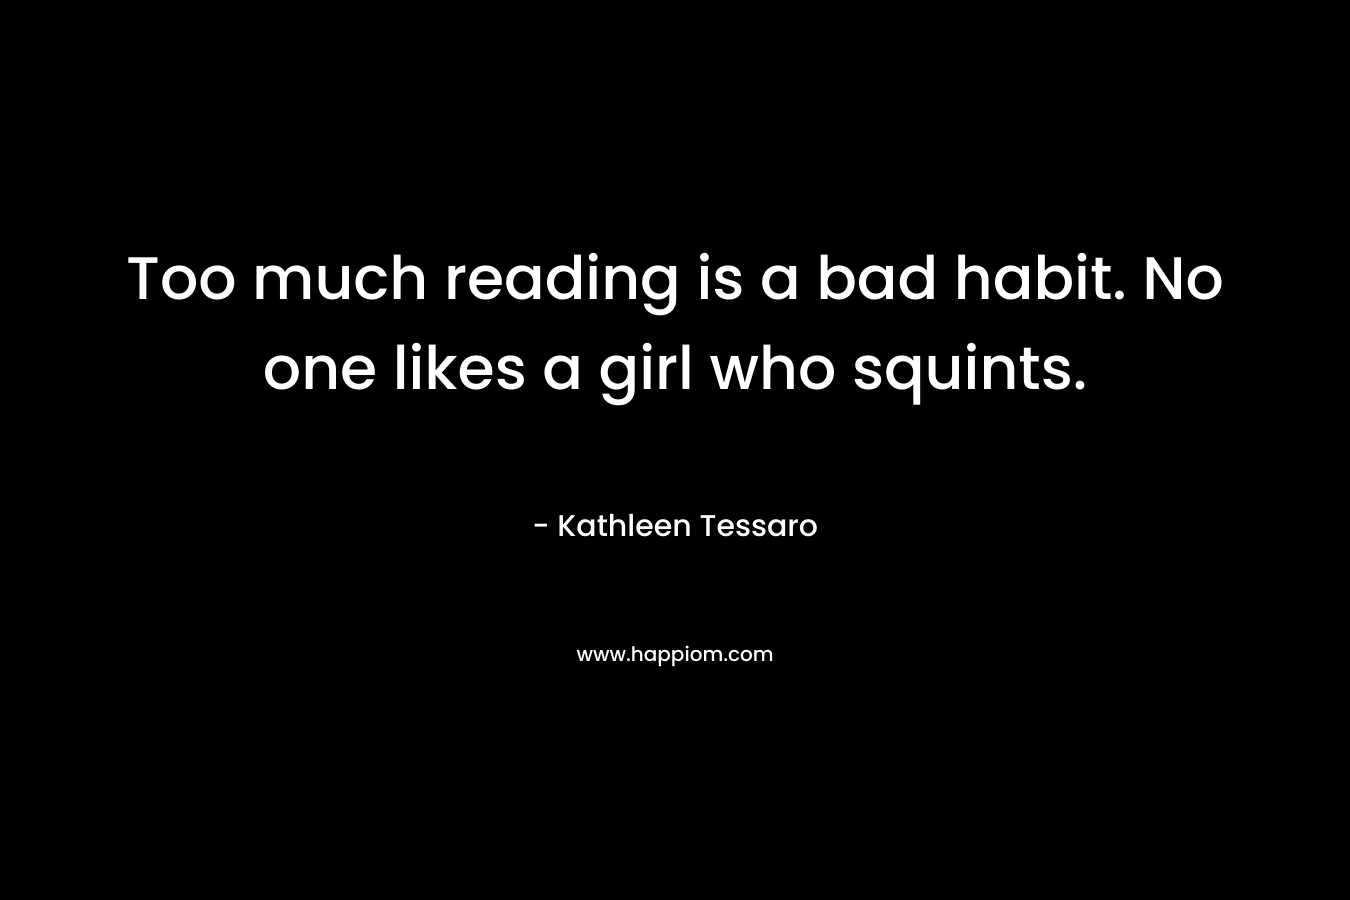 Too much reading is a bad habit. No one likes a girl who squints.